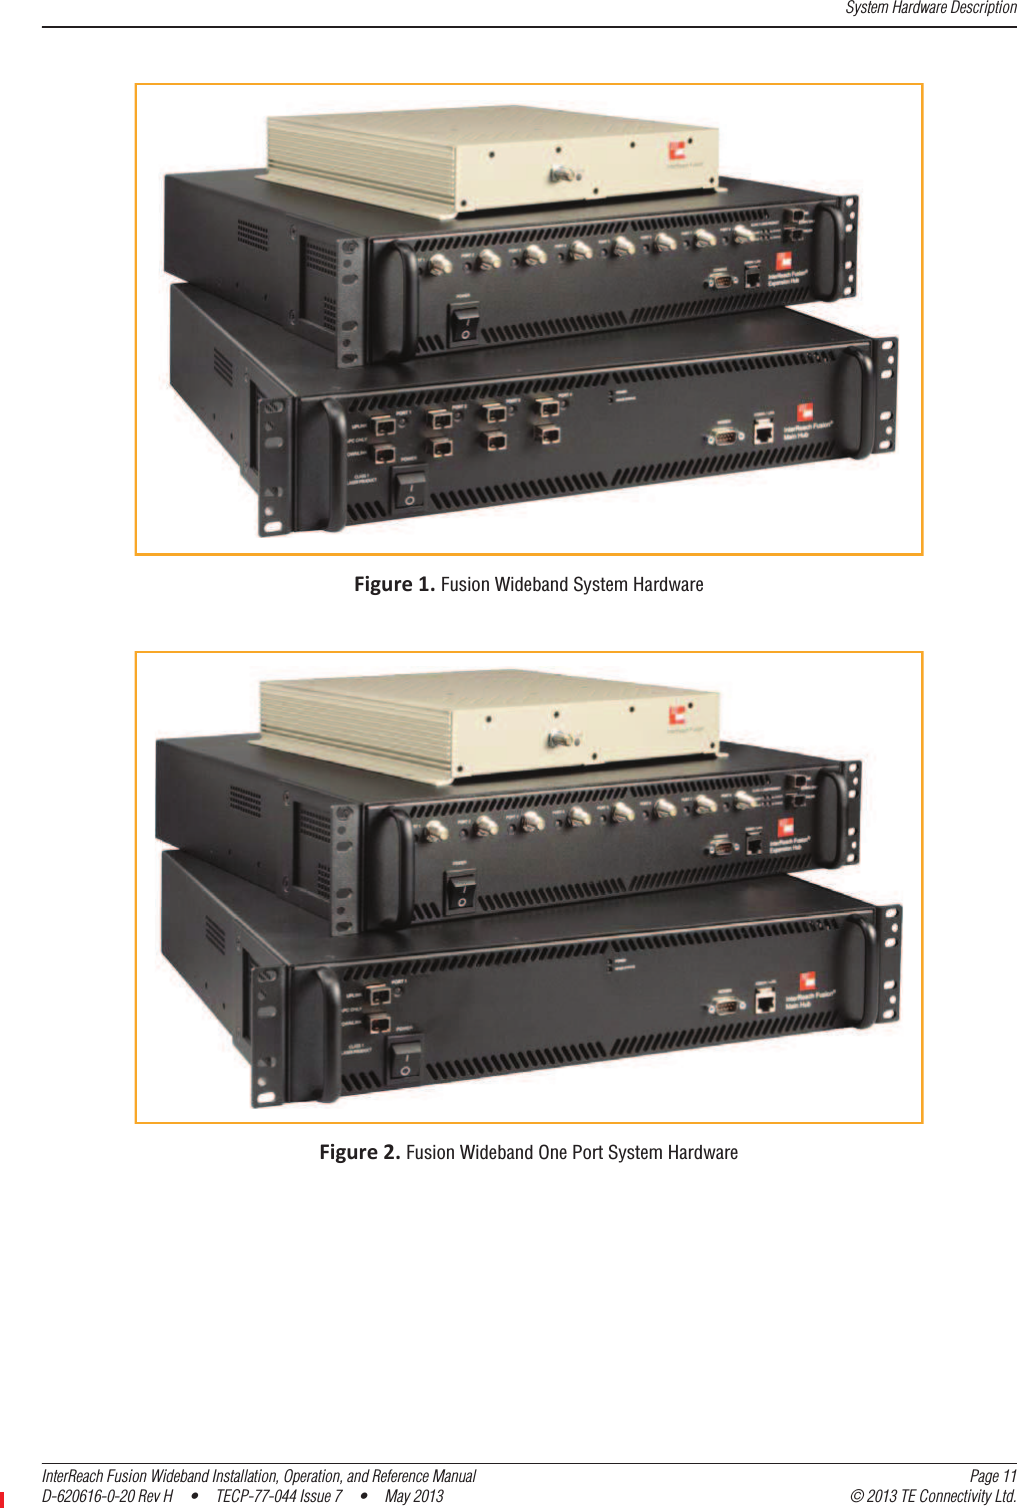 System Hardware DescriptionInterReach Fusion Wideband Installation, Operation, and Reference Manual Page 11D-620616-0-20 Rev H  •  TECP-77-044 Issue 7  •  May 2013 © 2013 TE Connectivity Ltd.Figure1.Fusion Wideband System HardwareFigure2.Fusion Wideband One Port System Hardware